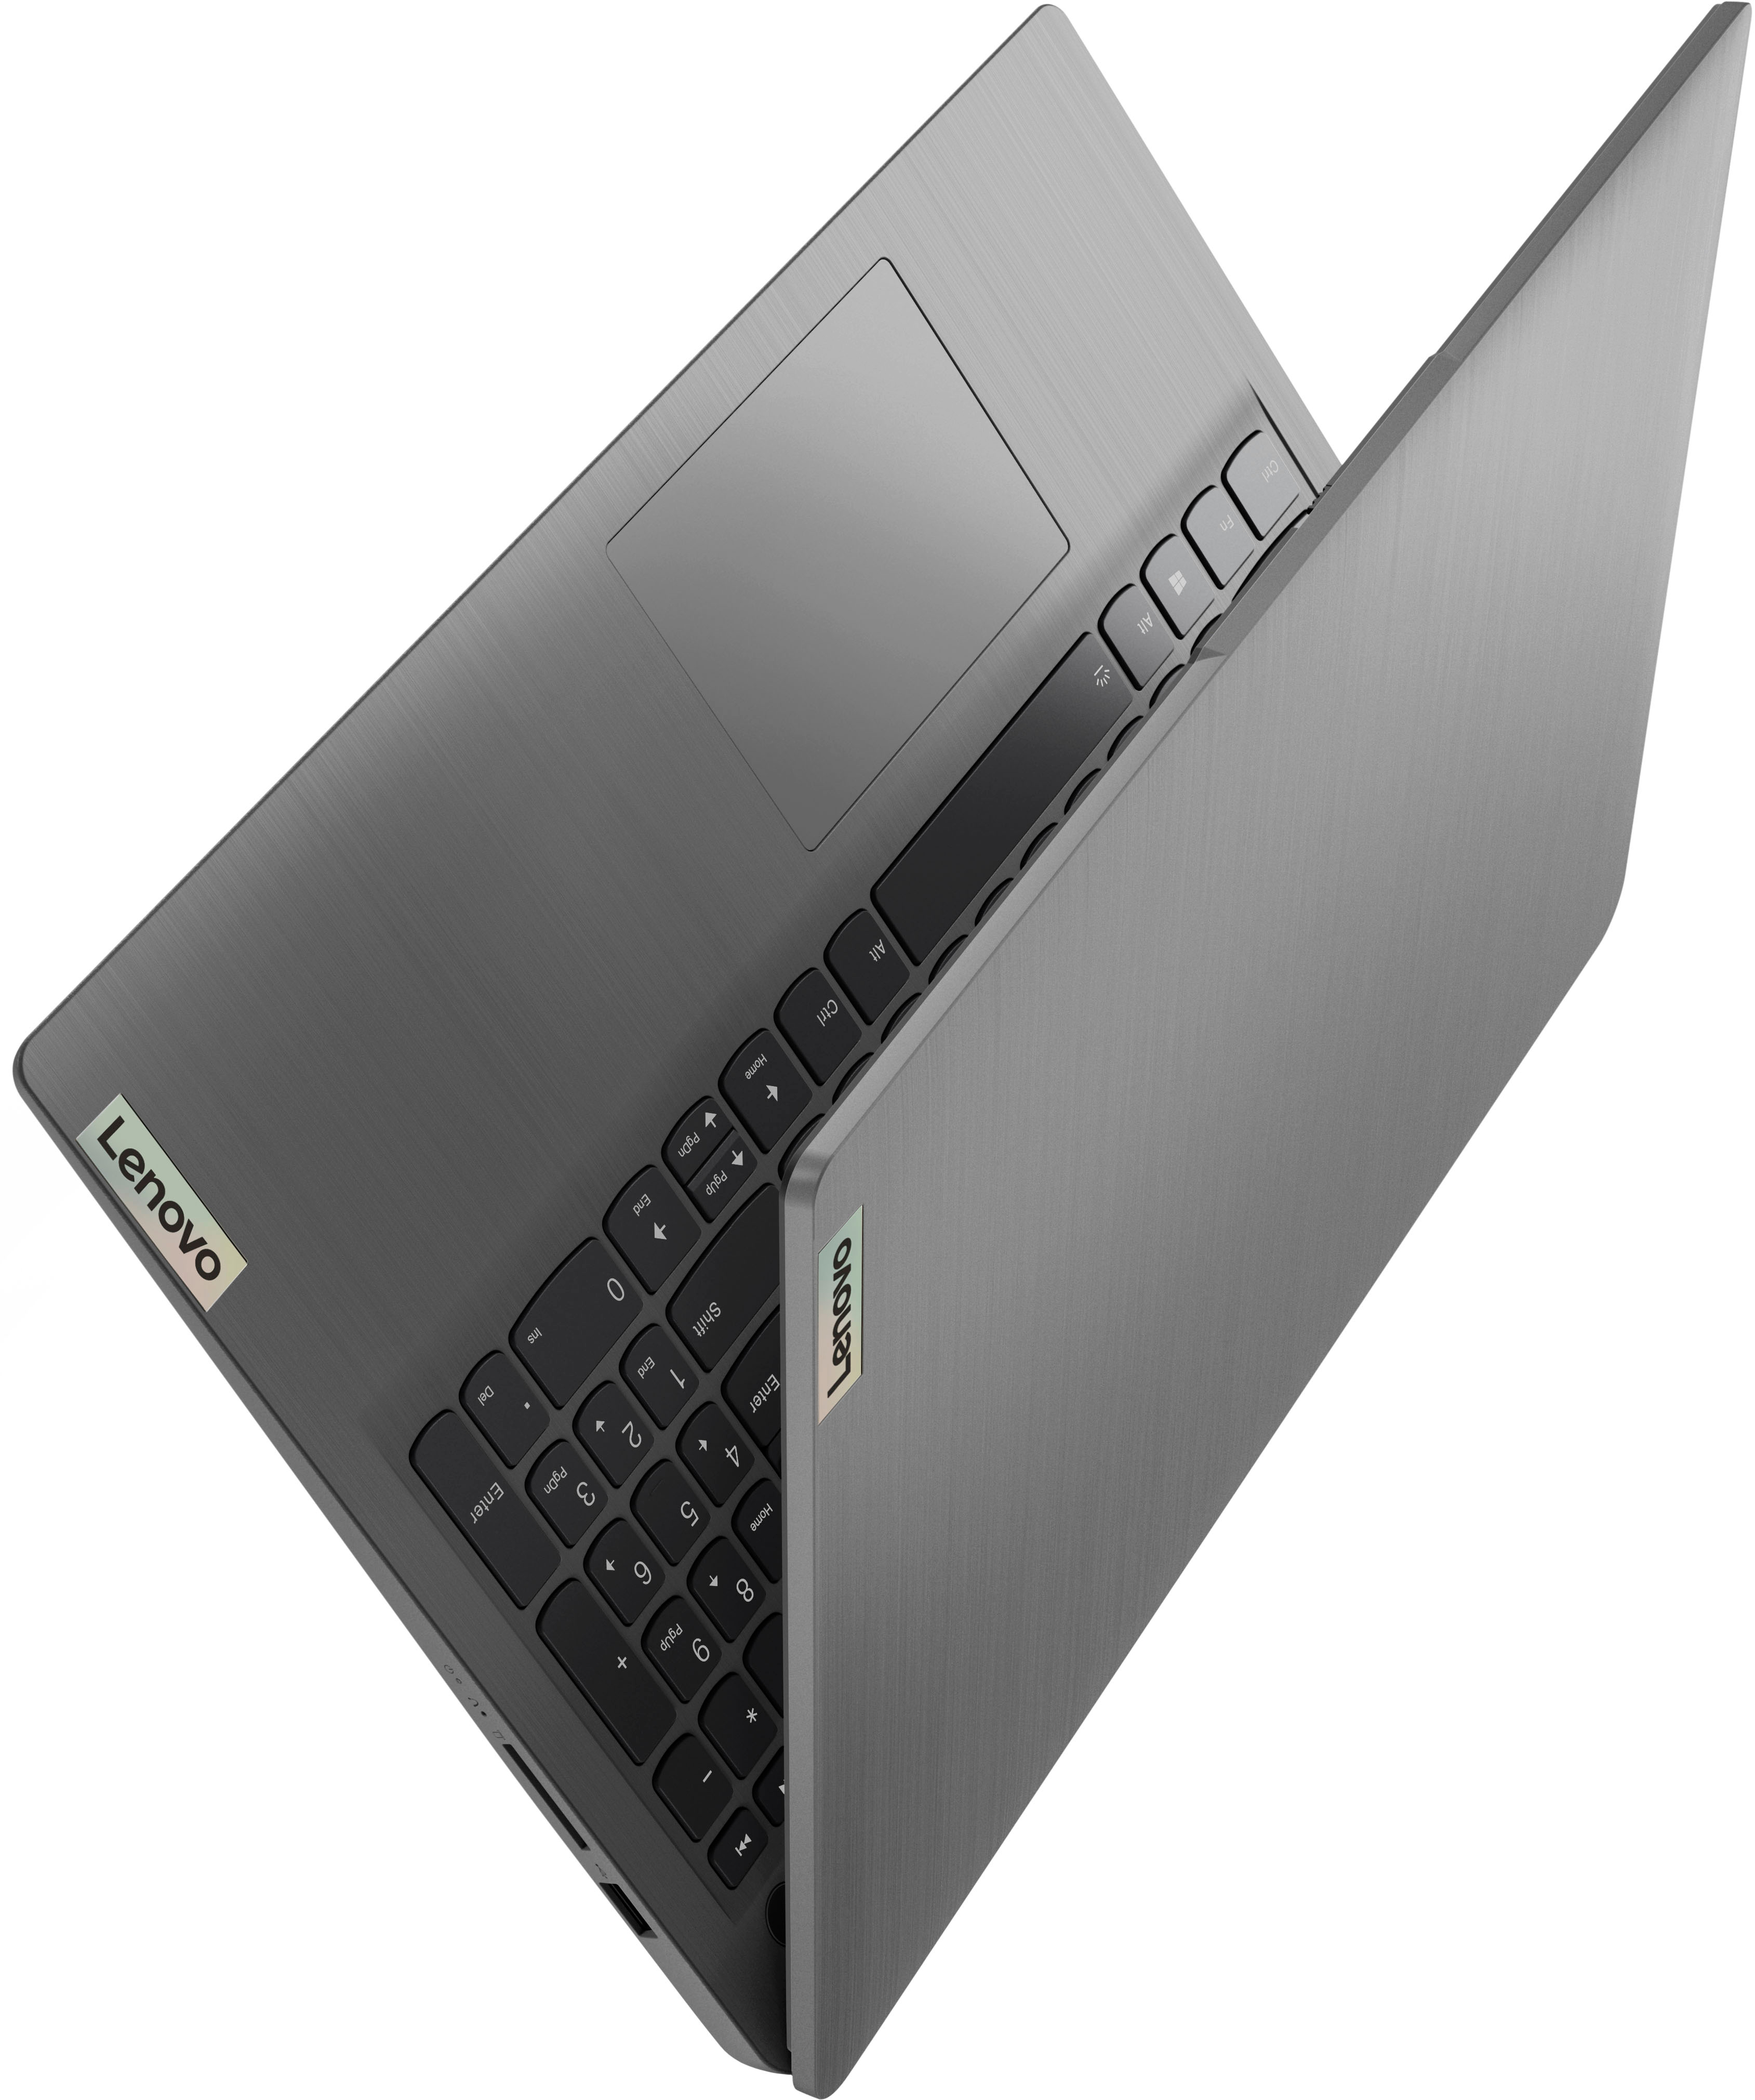 8GB Laptop Arctic Core Buy Best with 3i 82H803SDUS Ideapad 256GB Touch Lenovo Grey - 15.6\